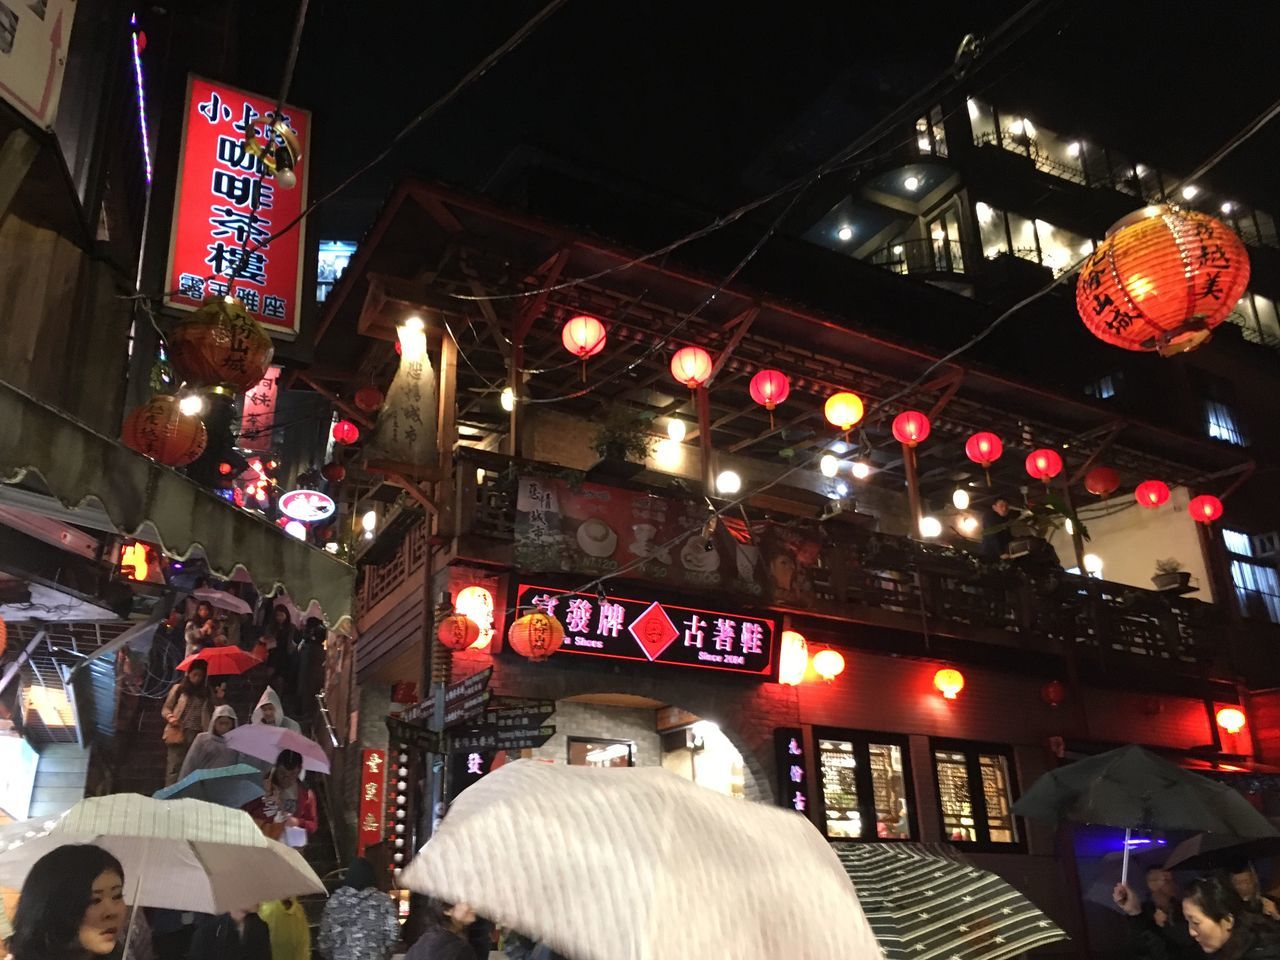 illuminated, night, lighting equipment, text, indoors, transportation, communication, low angle view, incidental people, non-western script, western script, built structure, architecture, travel, lantern, technology, city, hanging, neon